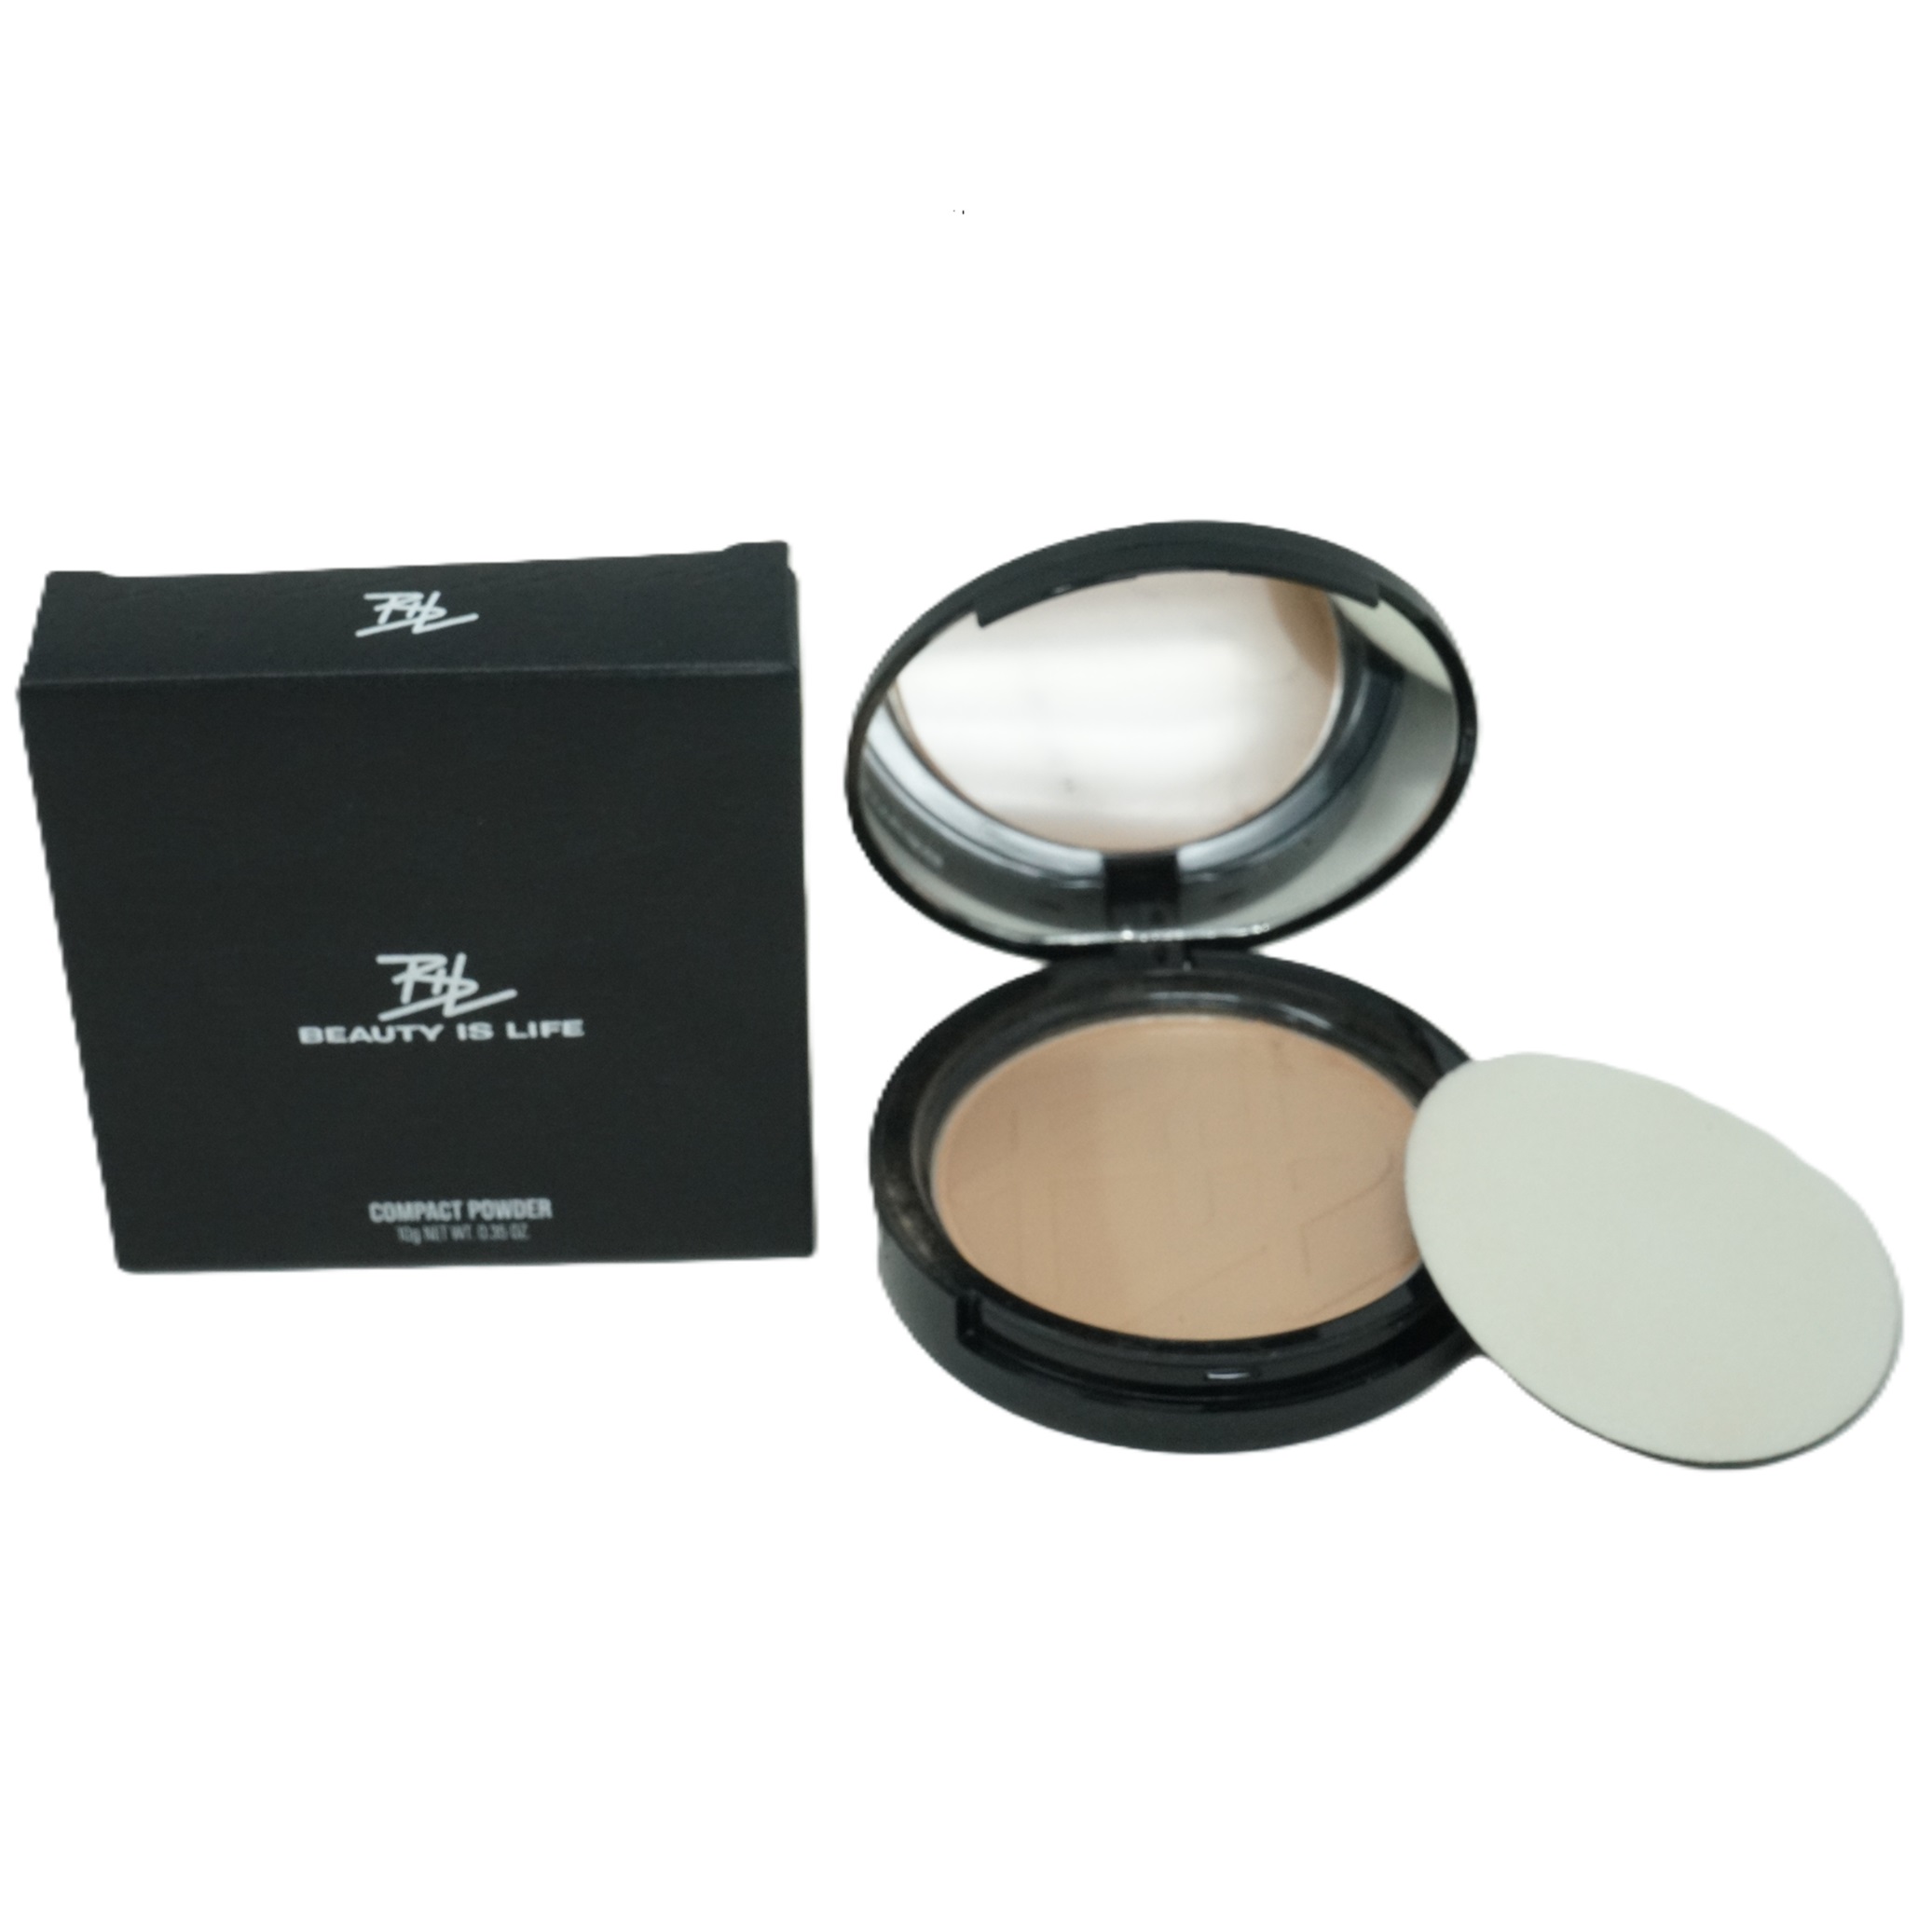 Beauty is Life Compact Powder 10g